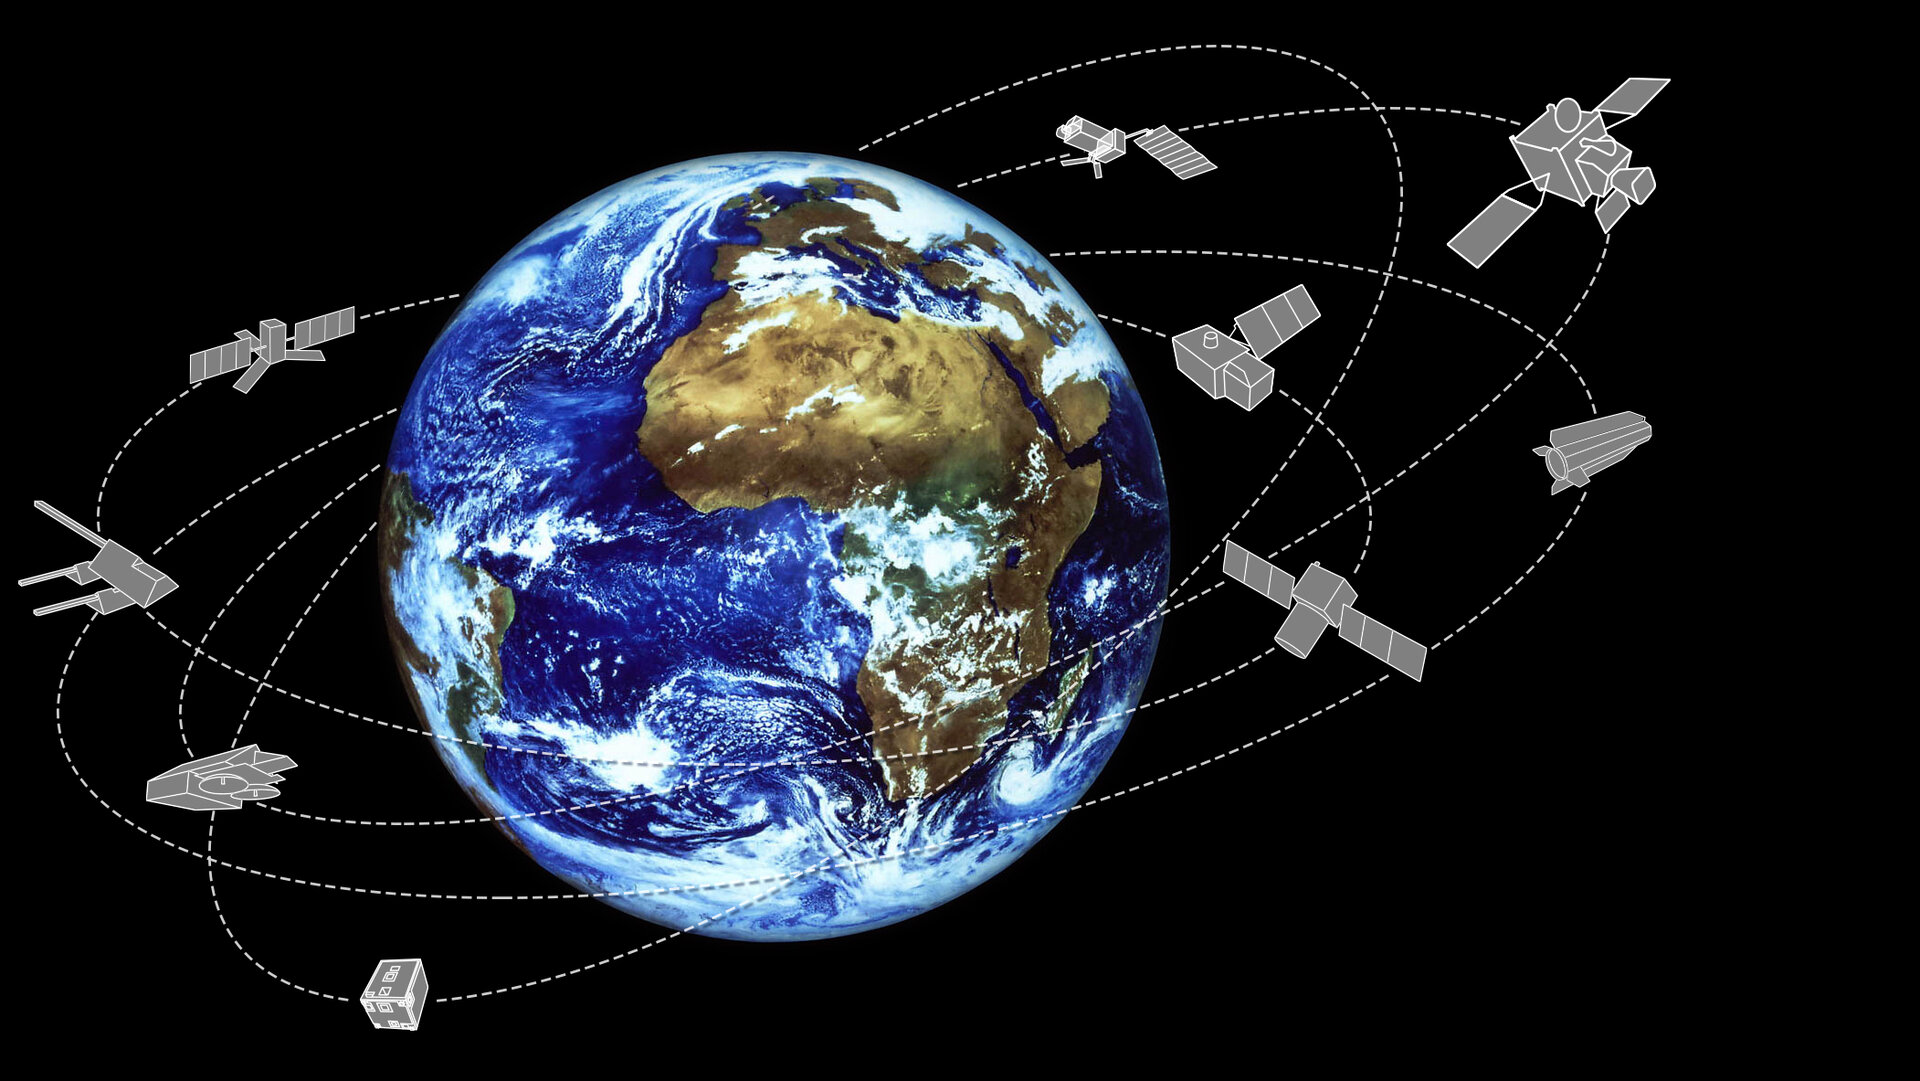 Sentinel satellites are doing an excellent job of tracking changes on Earth